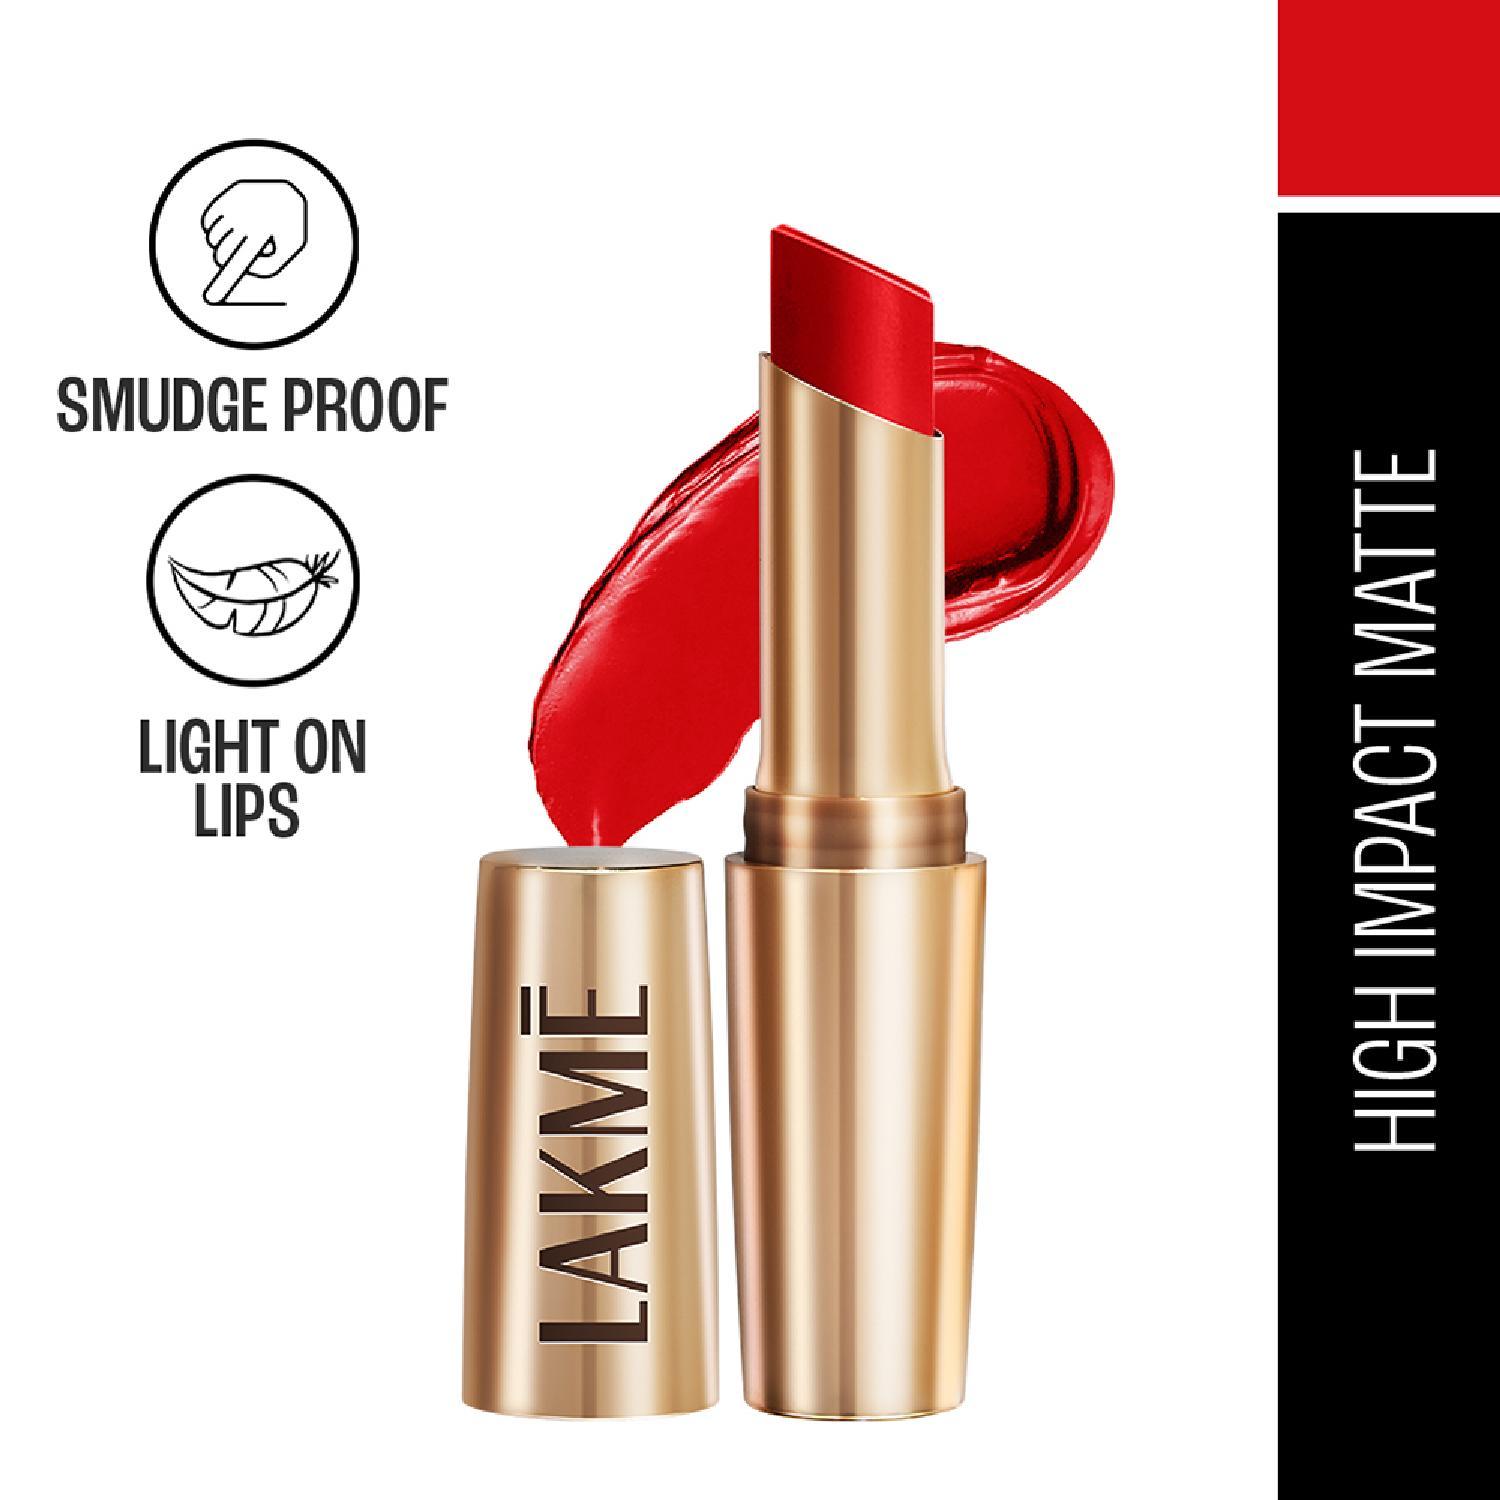 Lakme | Lakme 9 to 5 Powerplay Priming Matte Lipstick, Lasts 16hrs, Red Twist (3.6g)